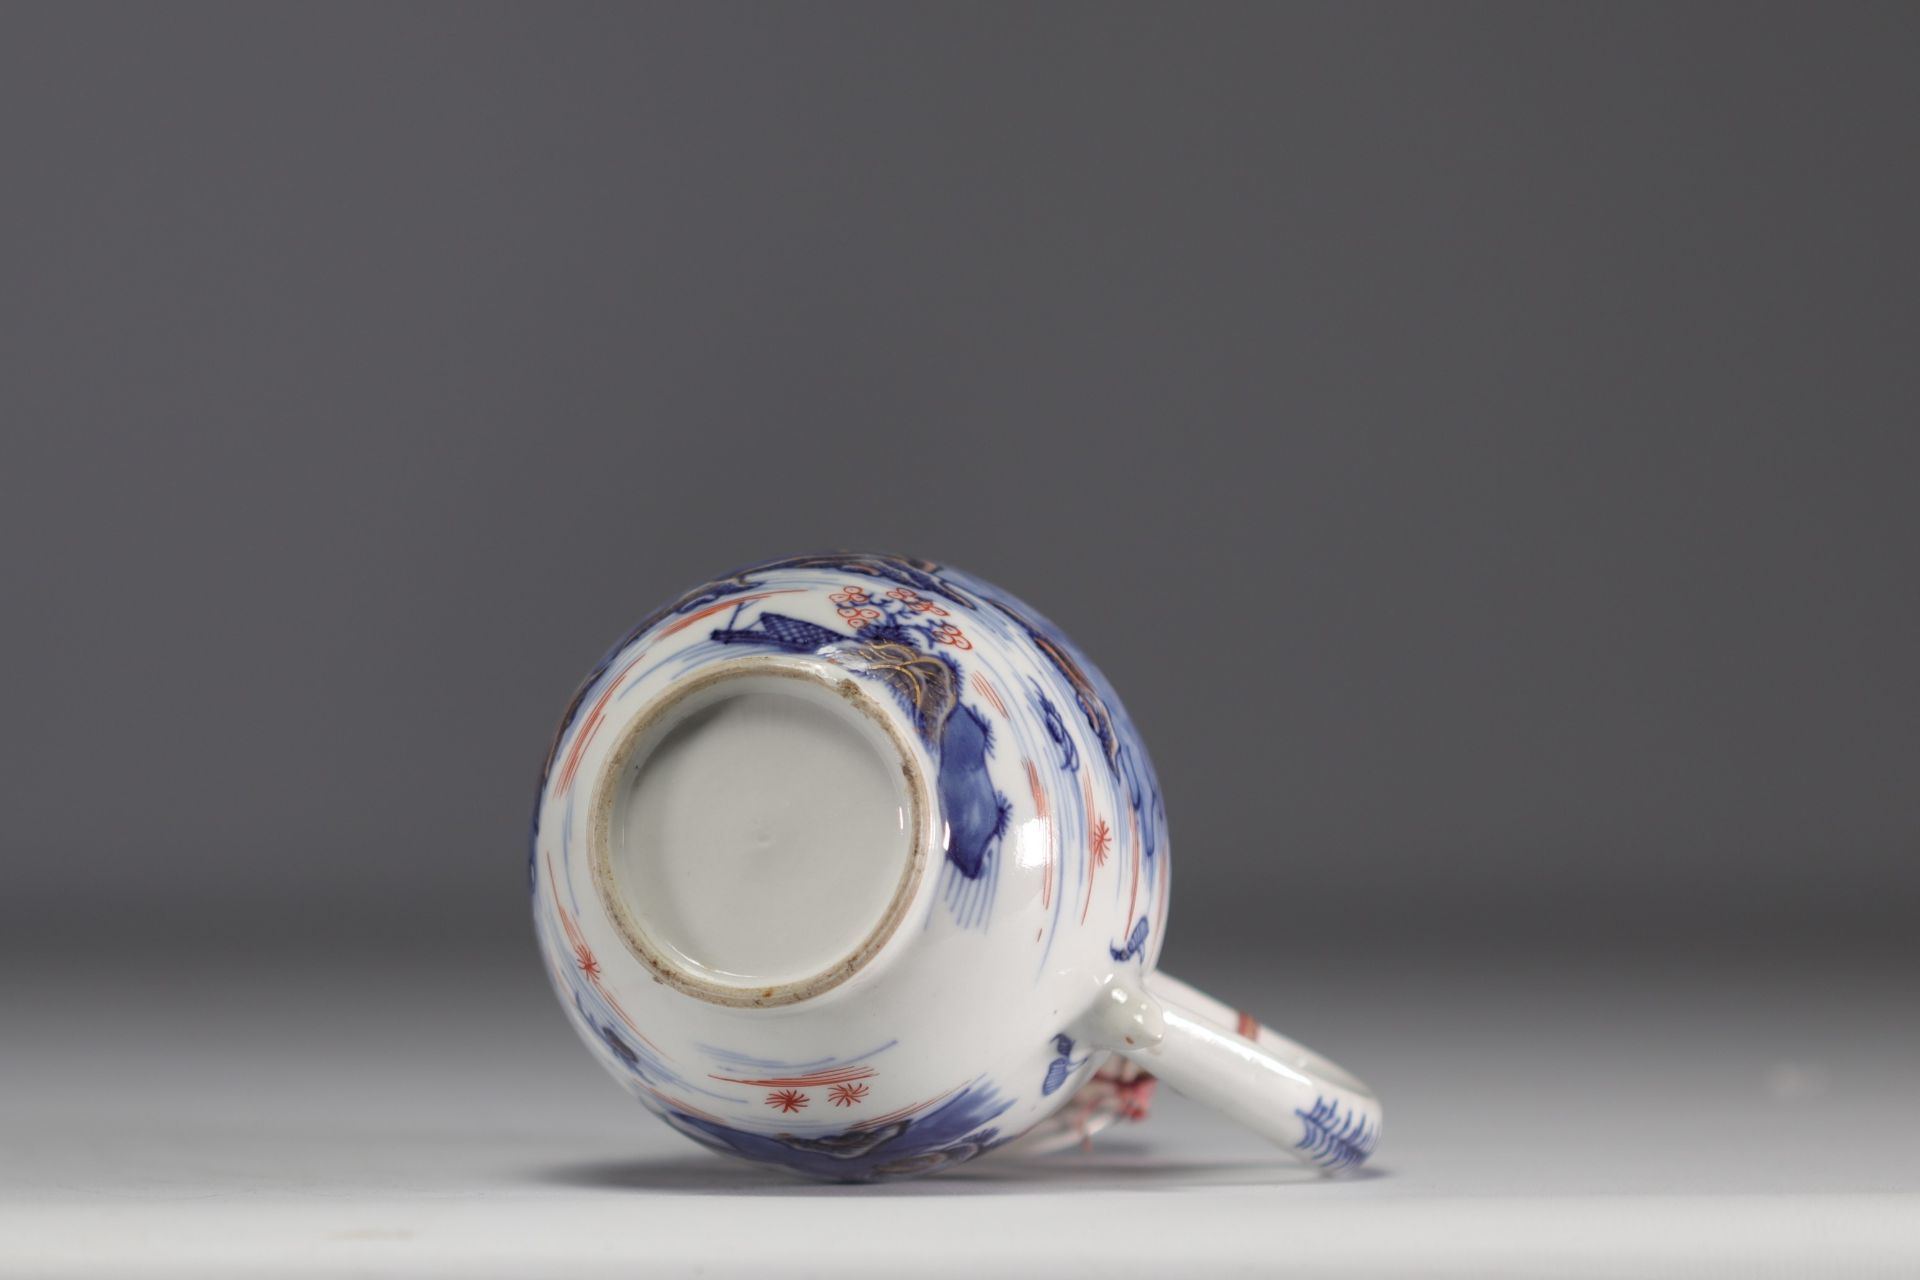 China - white, blue and red porcelain pot decorated with landscapes and figures, Qing period. - Image 5 of 5